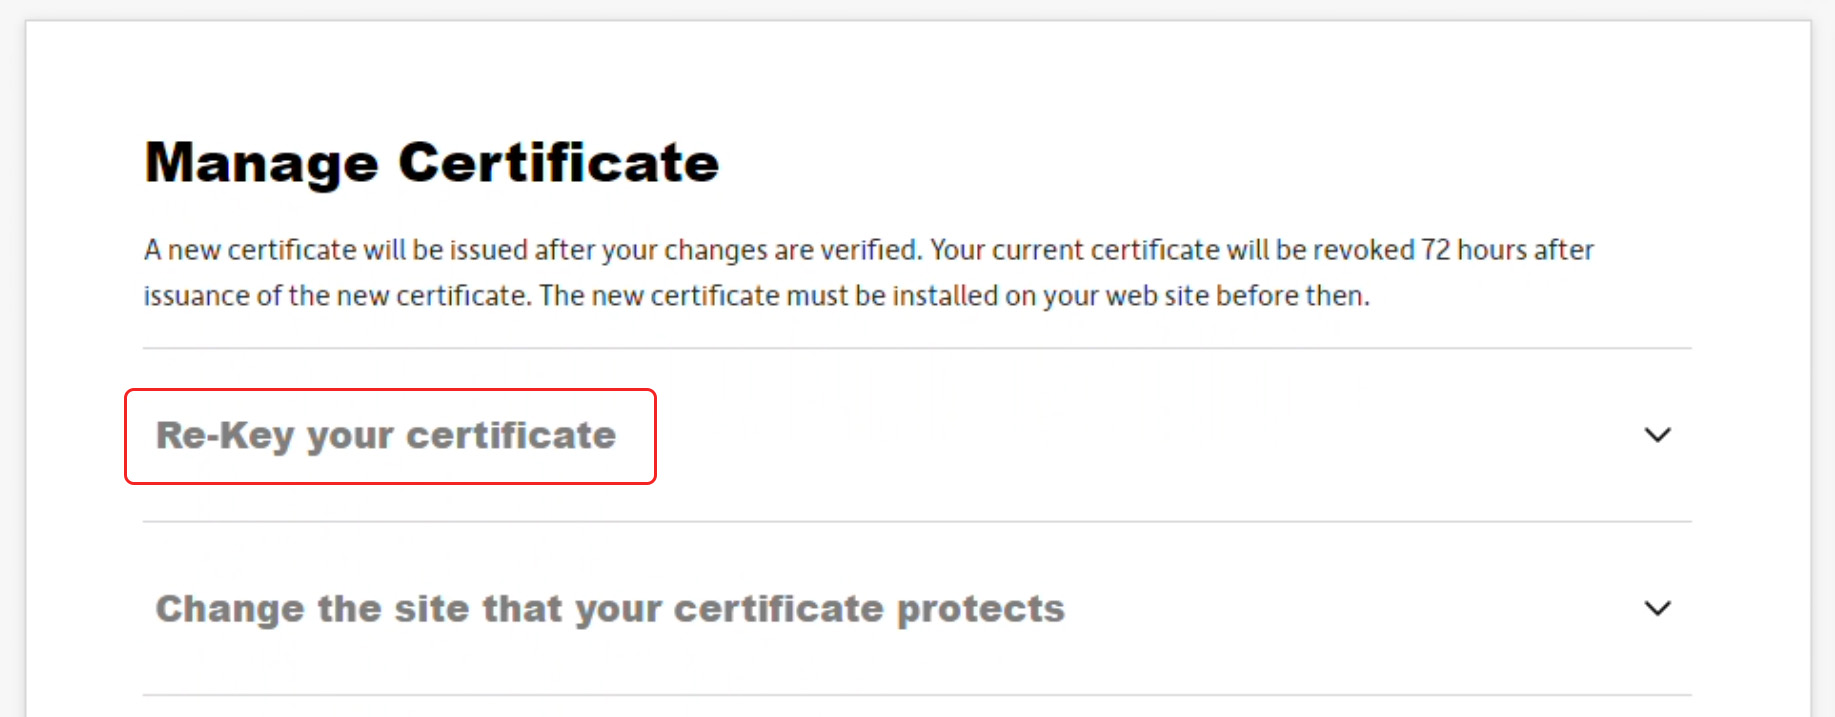 Select Re-Key your certificate